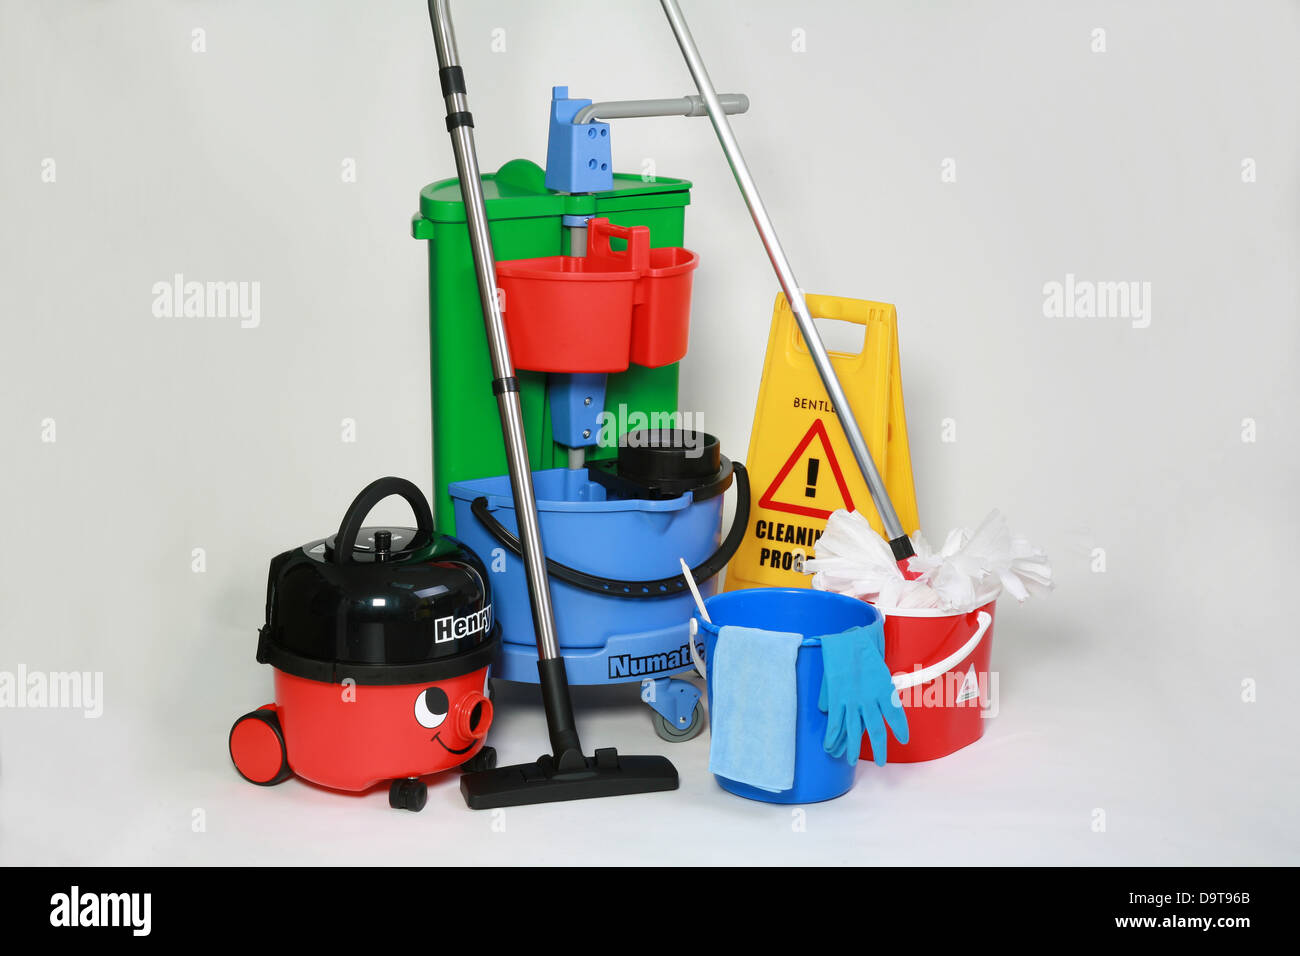 https://c8.alamy.com/comp/D9T96B/cleaners-janitorial-equipment-on-a-white-background-D9T96B.jpg